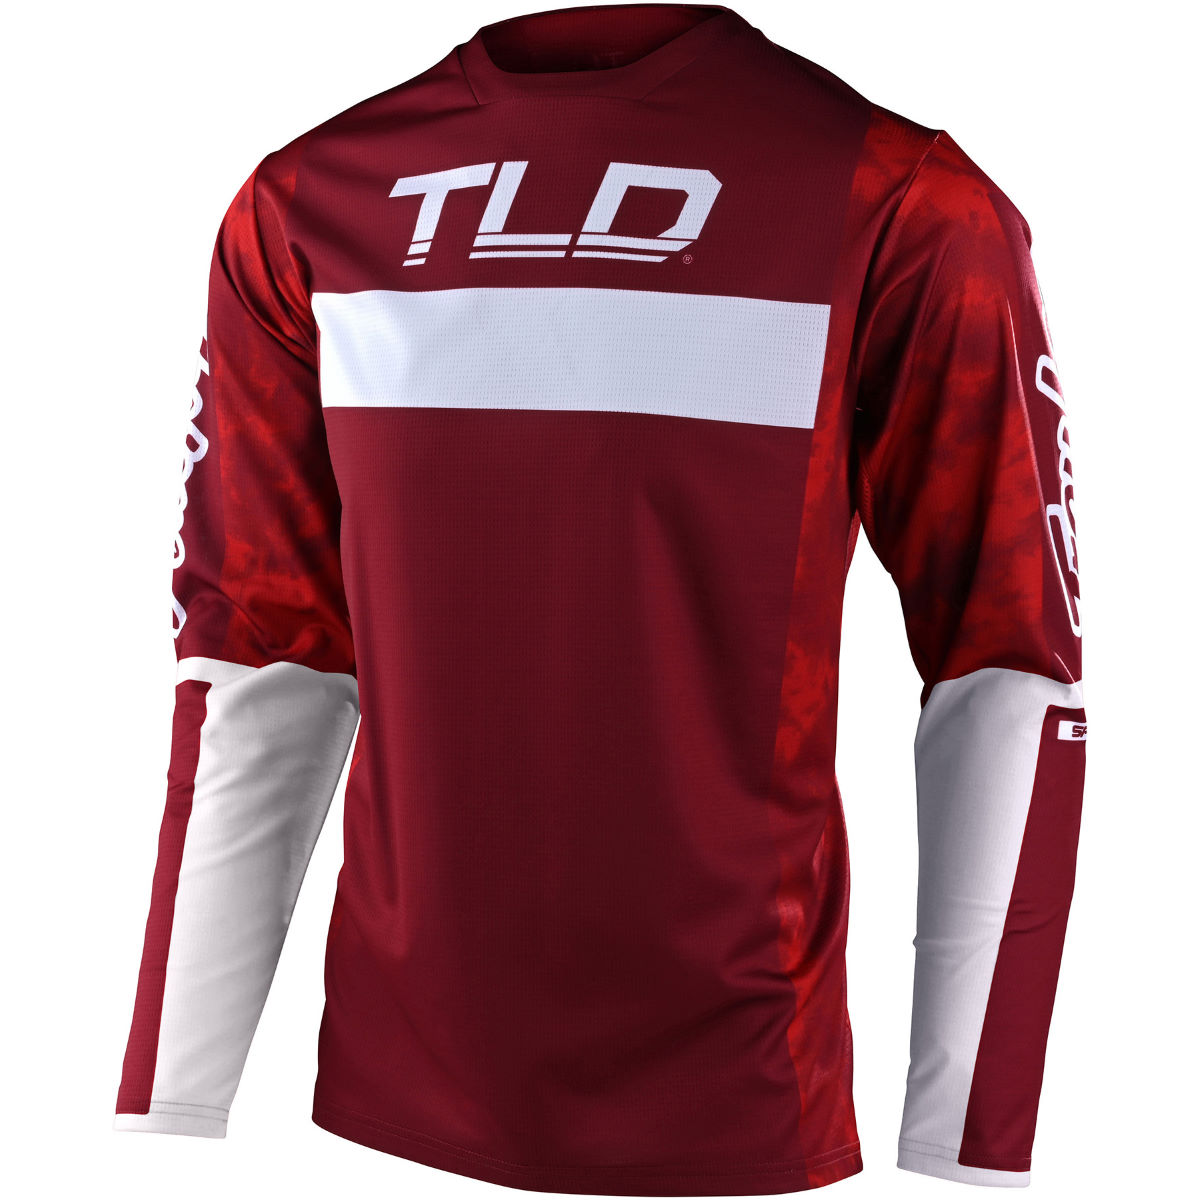 Maillot Troy Lee Designs Sprint Seca 2.0 - Maillots